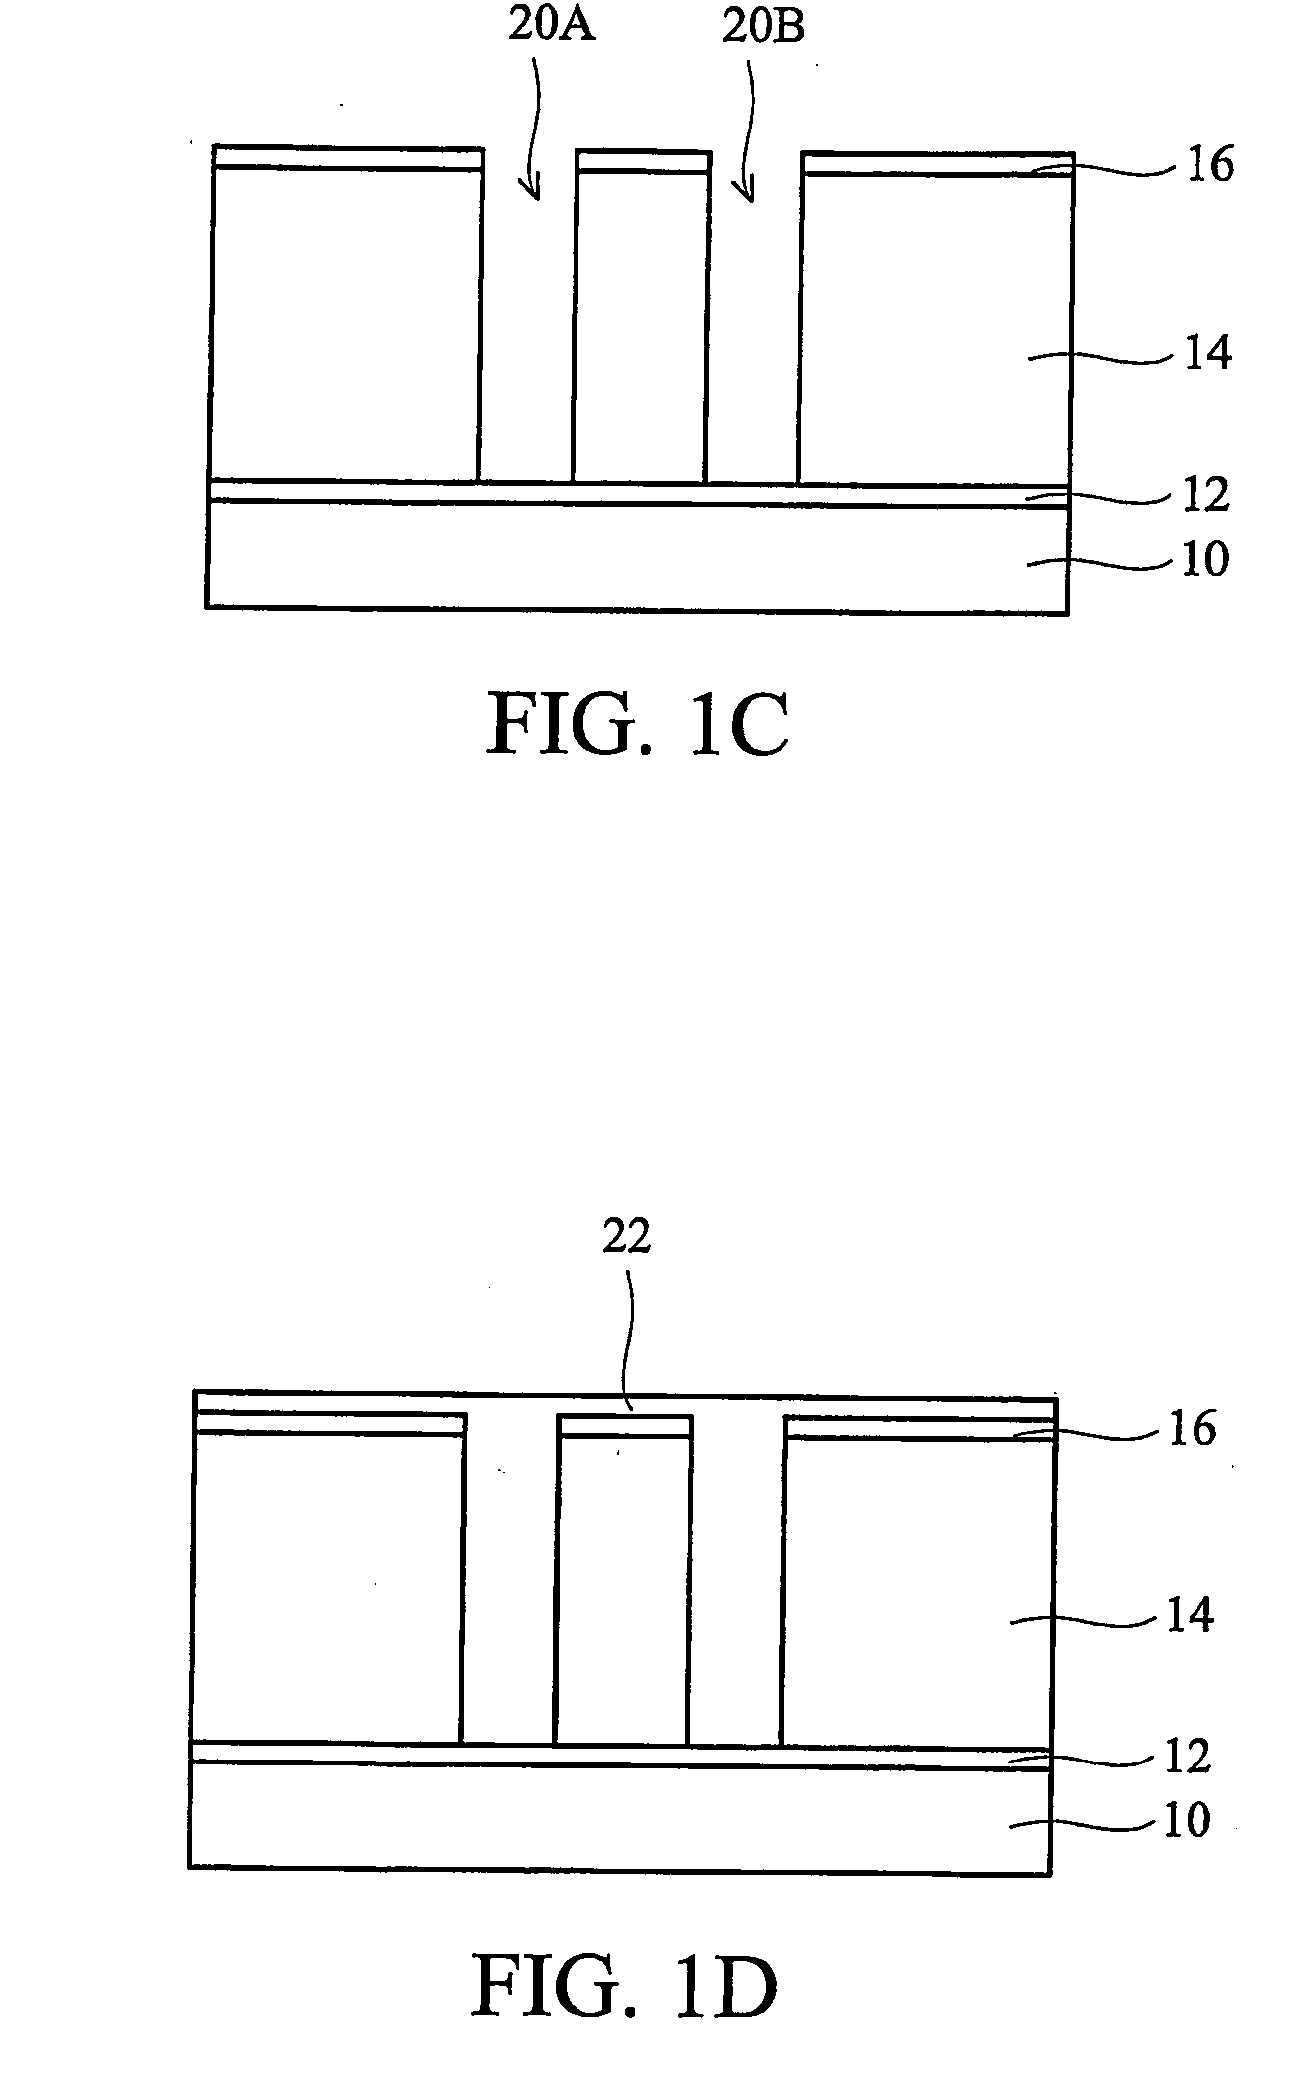 Method for forming dual damascene with improved etch profiles